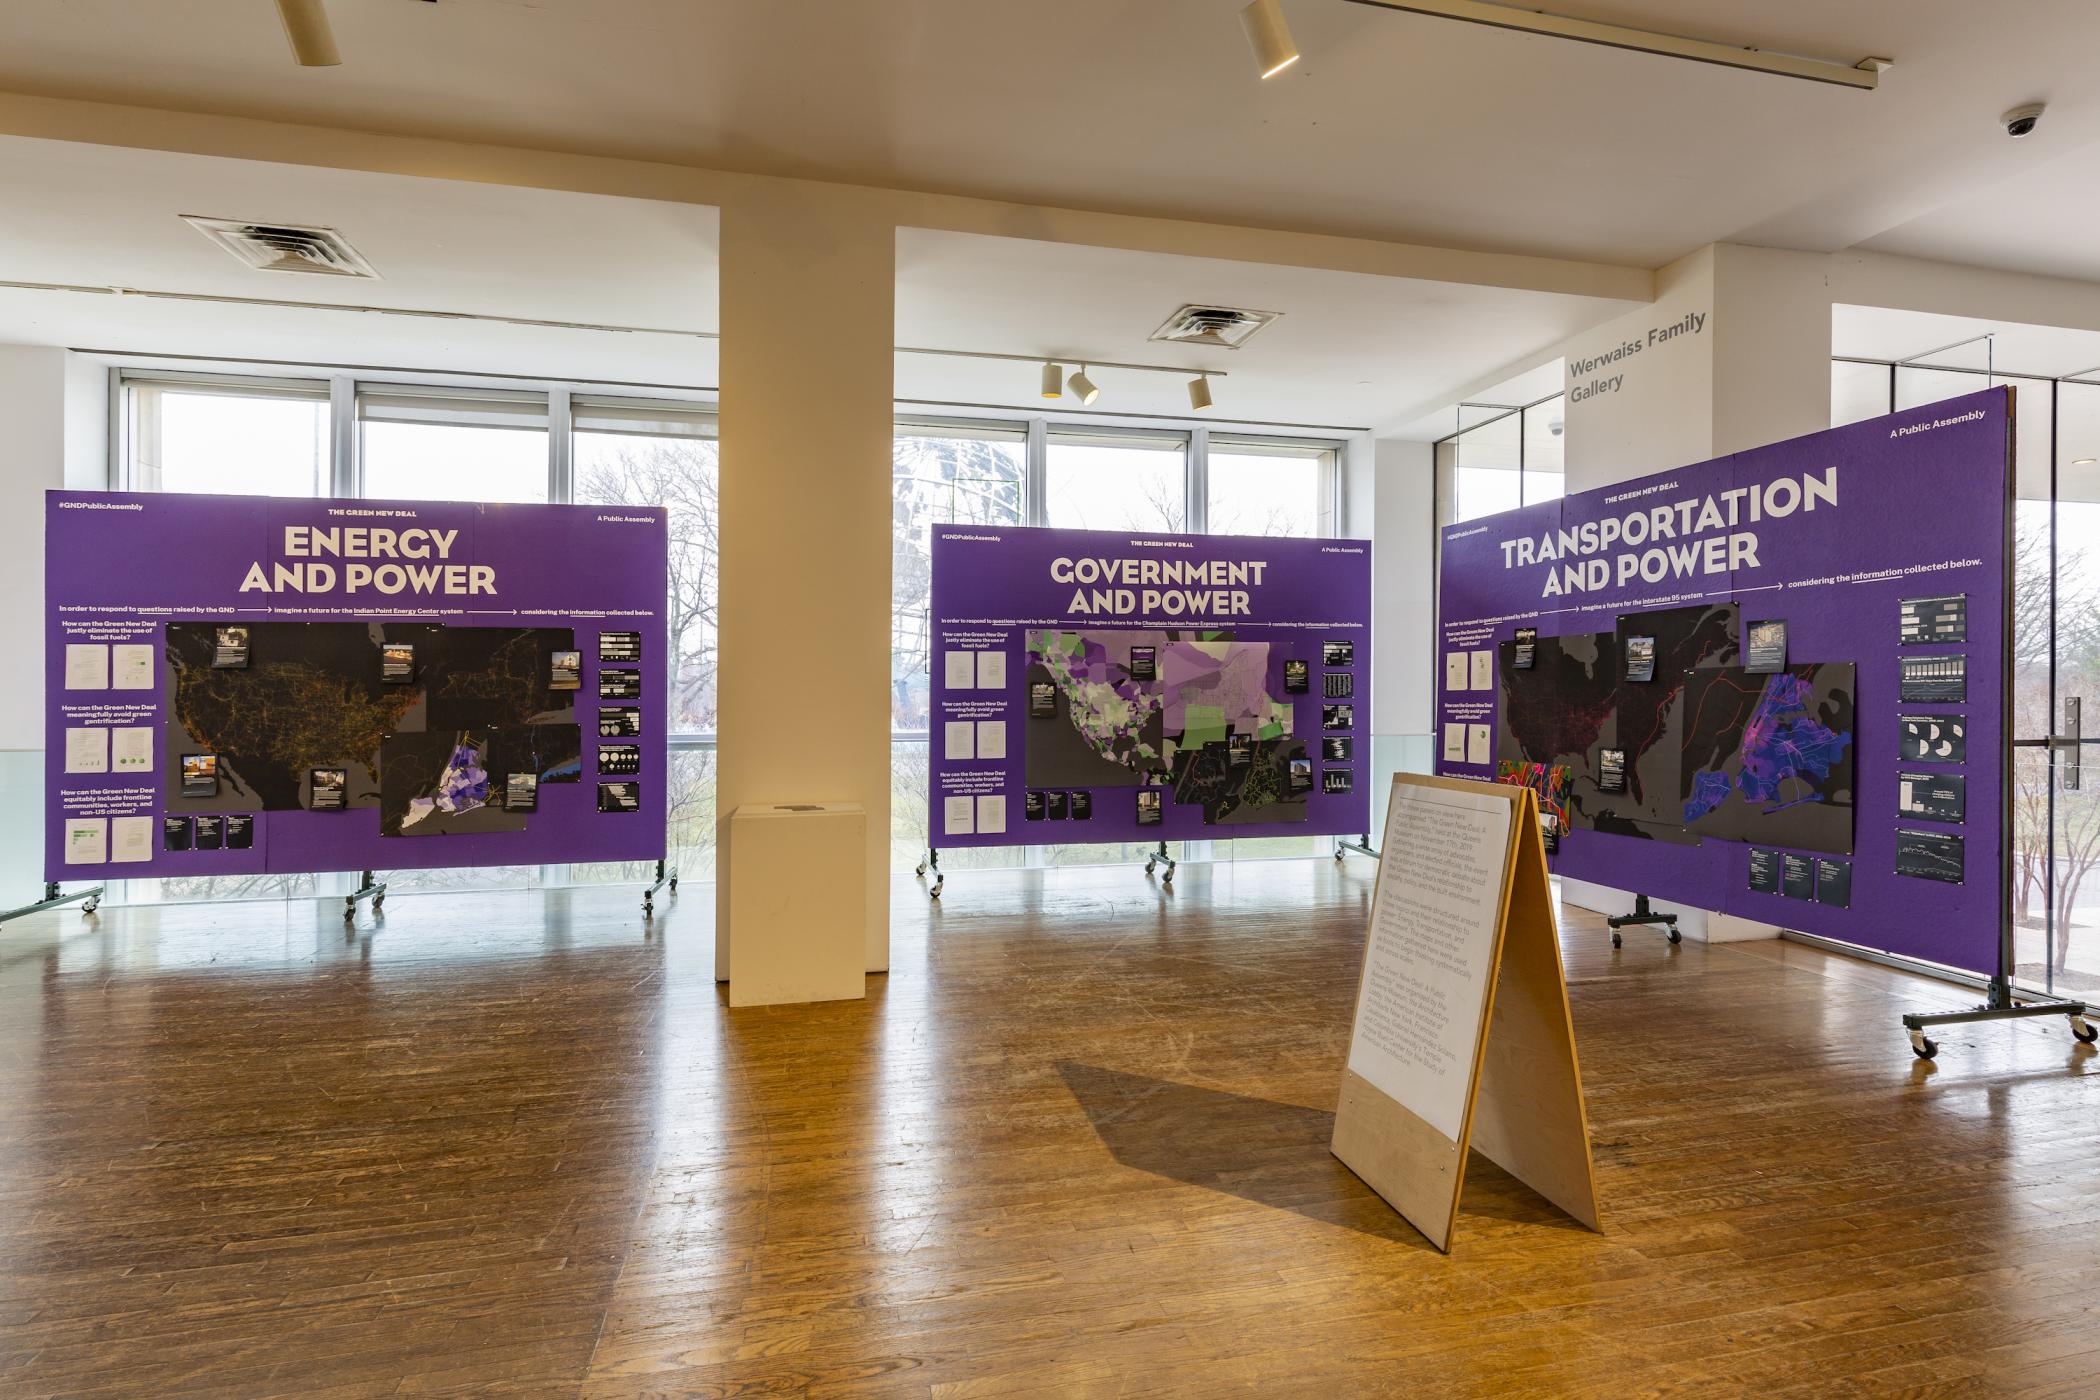 Three purple large purple posters arranged in an L-shape display information under the headers "Energy and Power," "Government and Power," and "Transportation and Power"